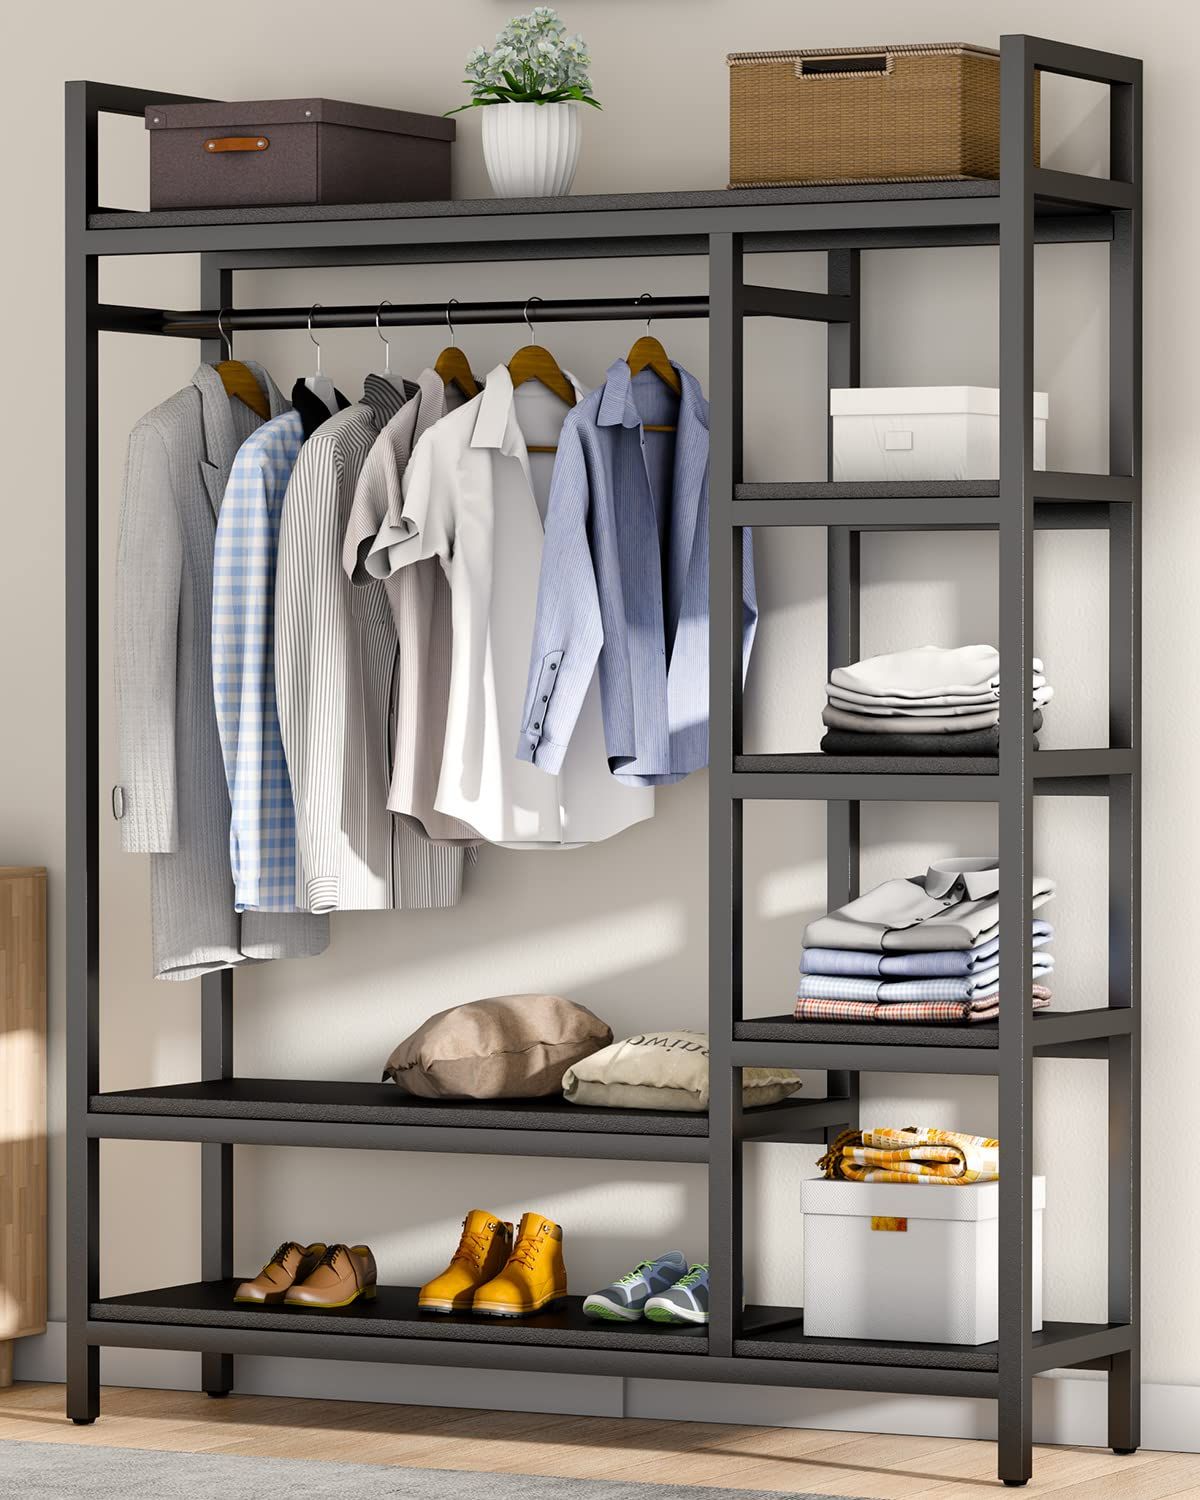 Closet Organizer Wardrobes With Regard To Most Recent Amazon: Hokeeper 600lbs Capacity Free Standing Closet Organizer With 6  Metal Shelves Heavy Duty Clothing Rack For Hanging Clothes Sturdy Storage Wardrobe  Closet Garment Rack For Bedroom : Home & Kitchen (View 5 of 10)